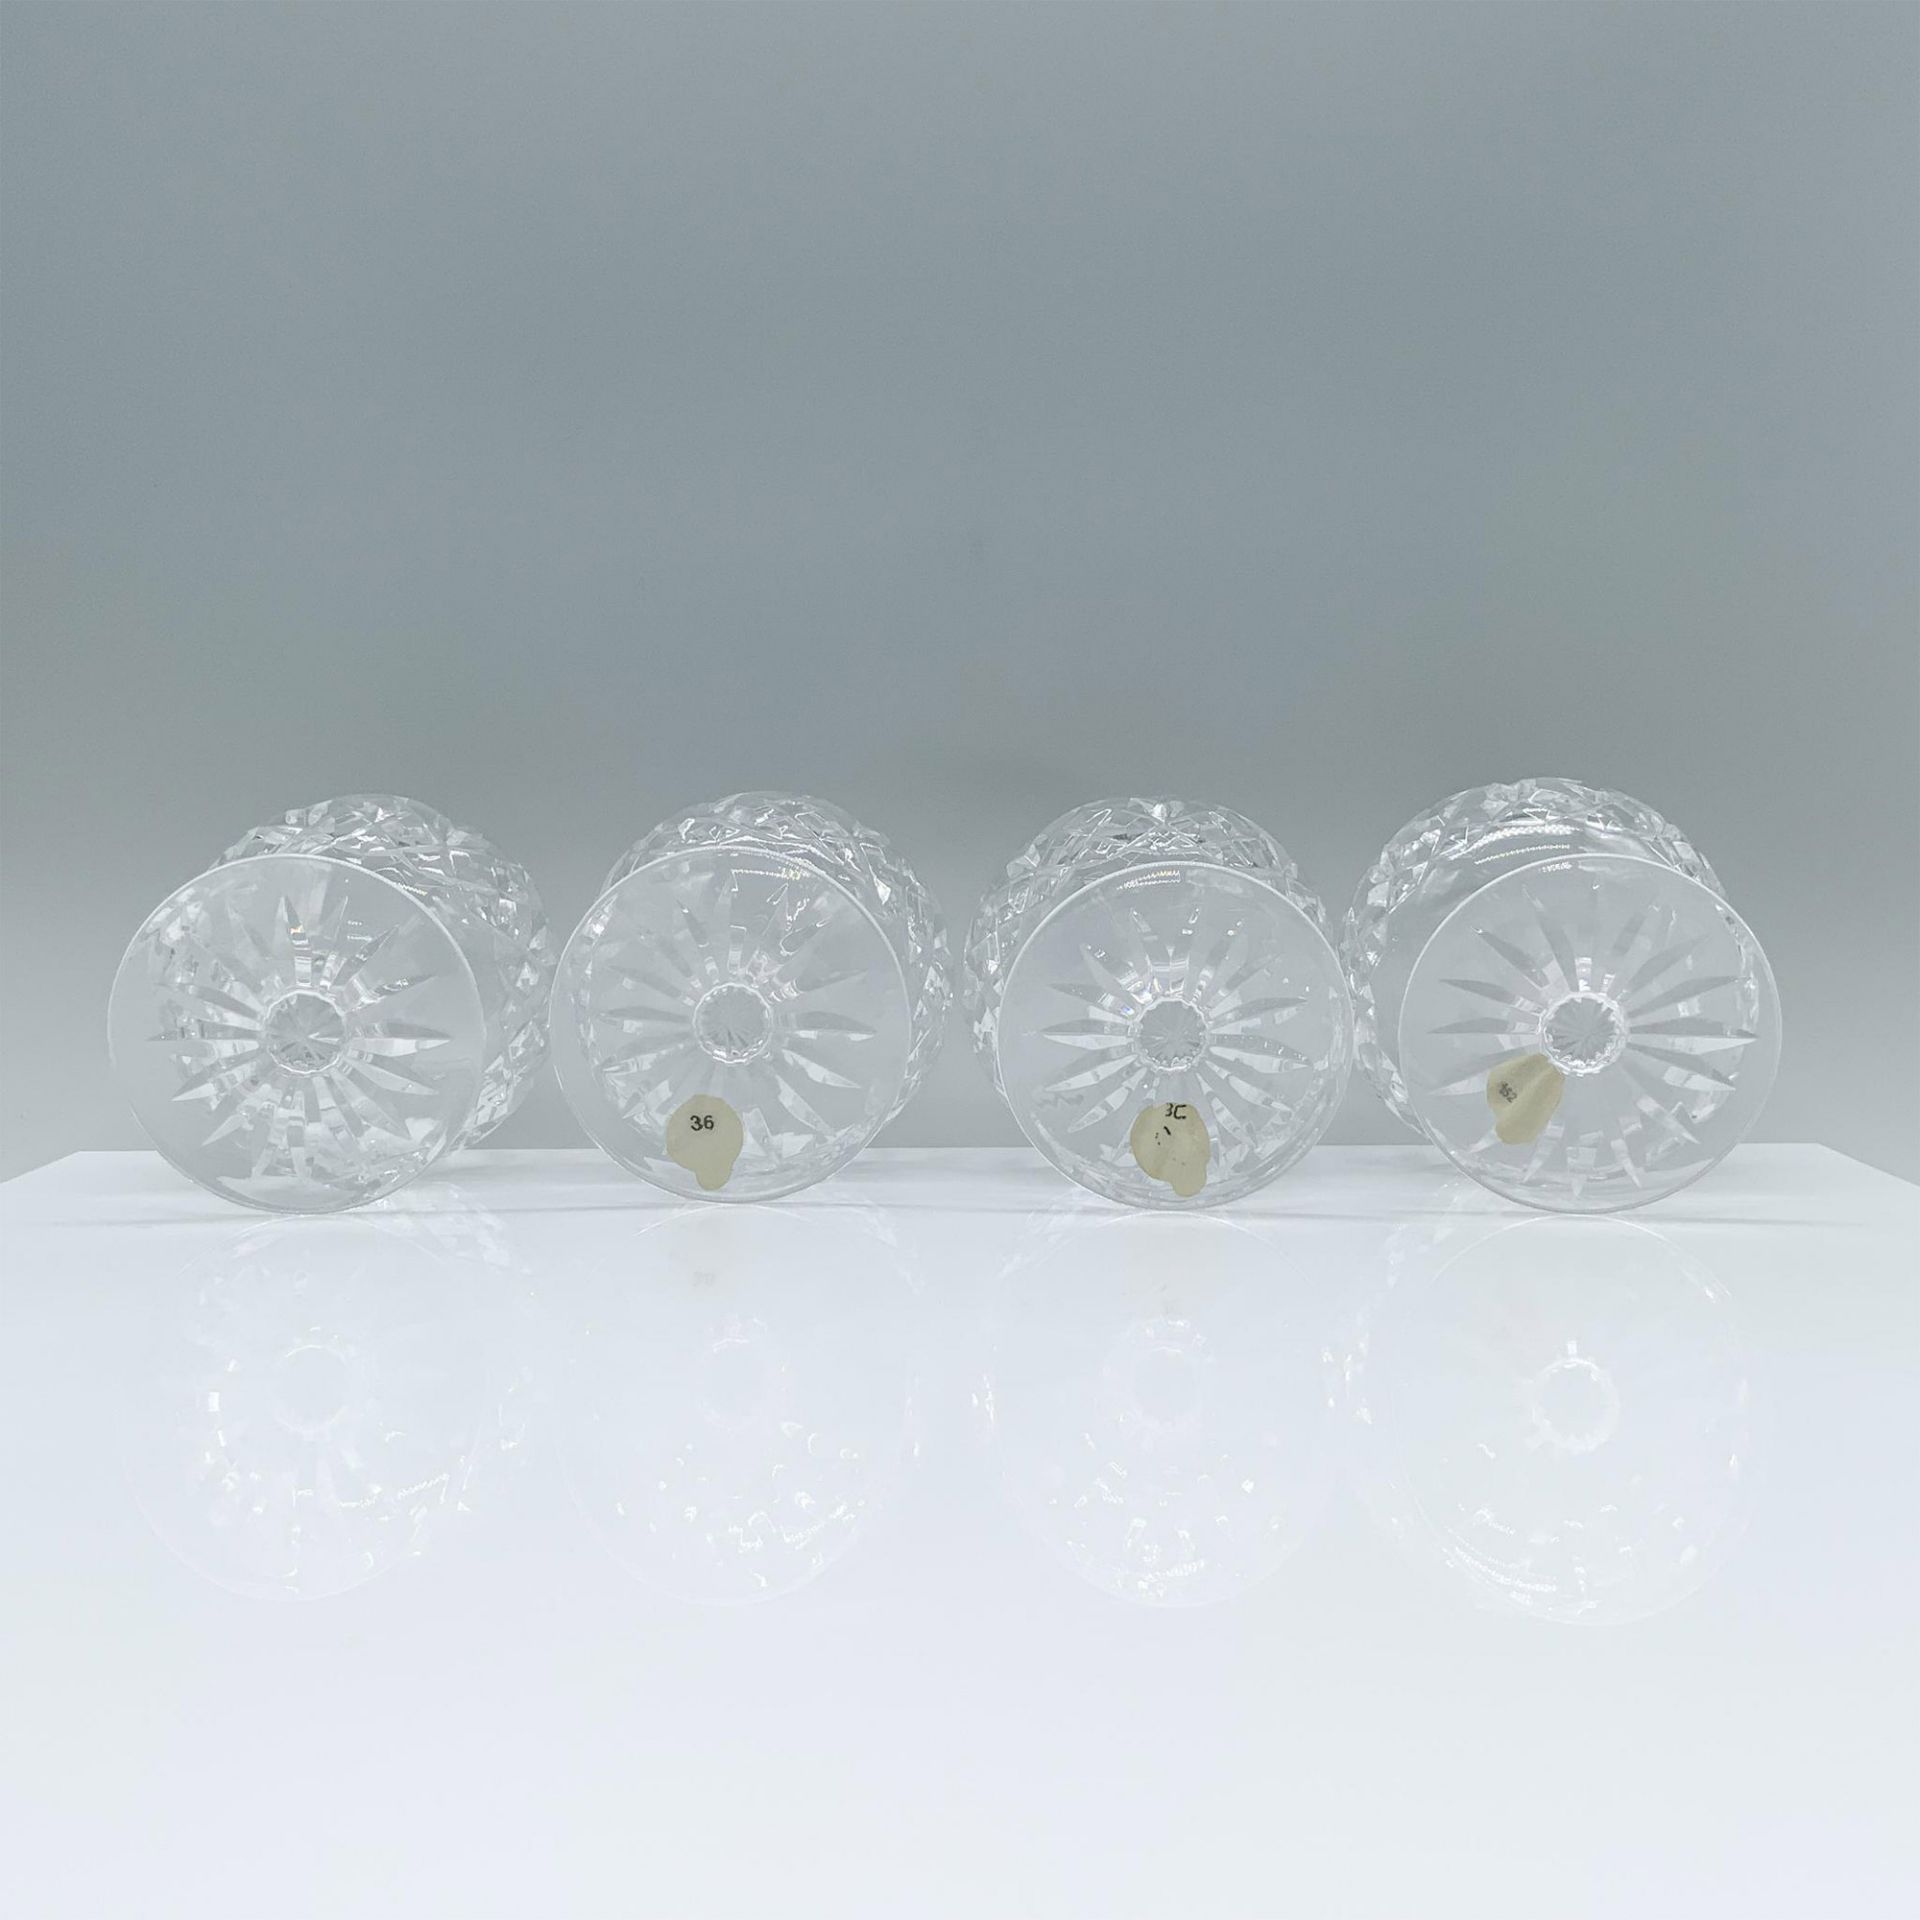 4pc Waterford Crystal Brandy Glasses, Lismore - Image 3 of 4